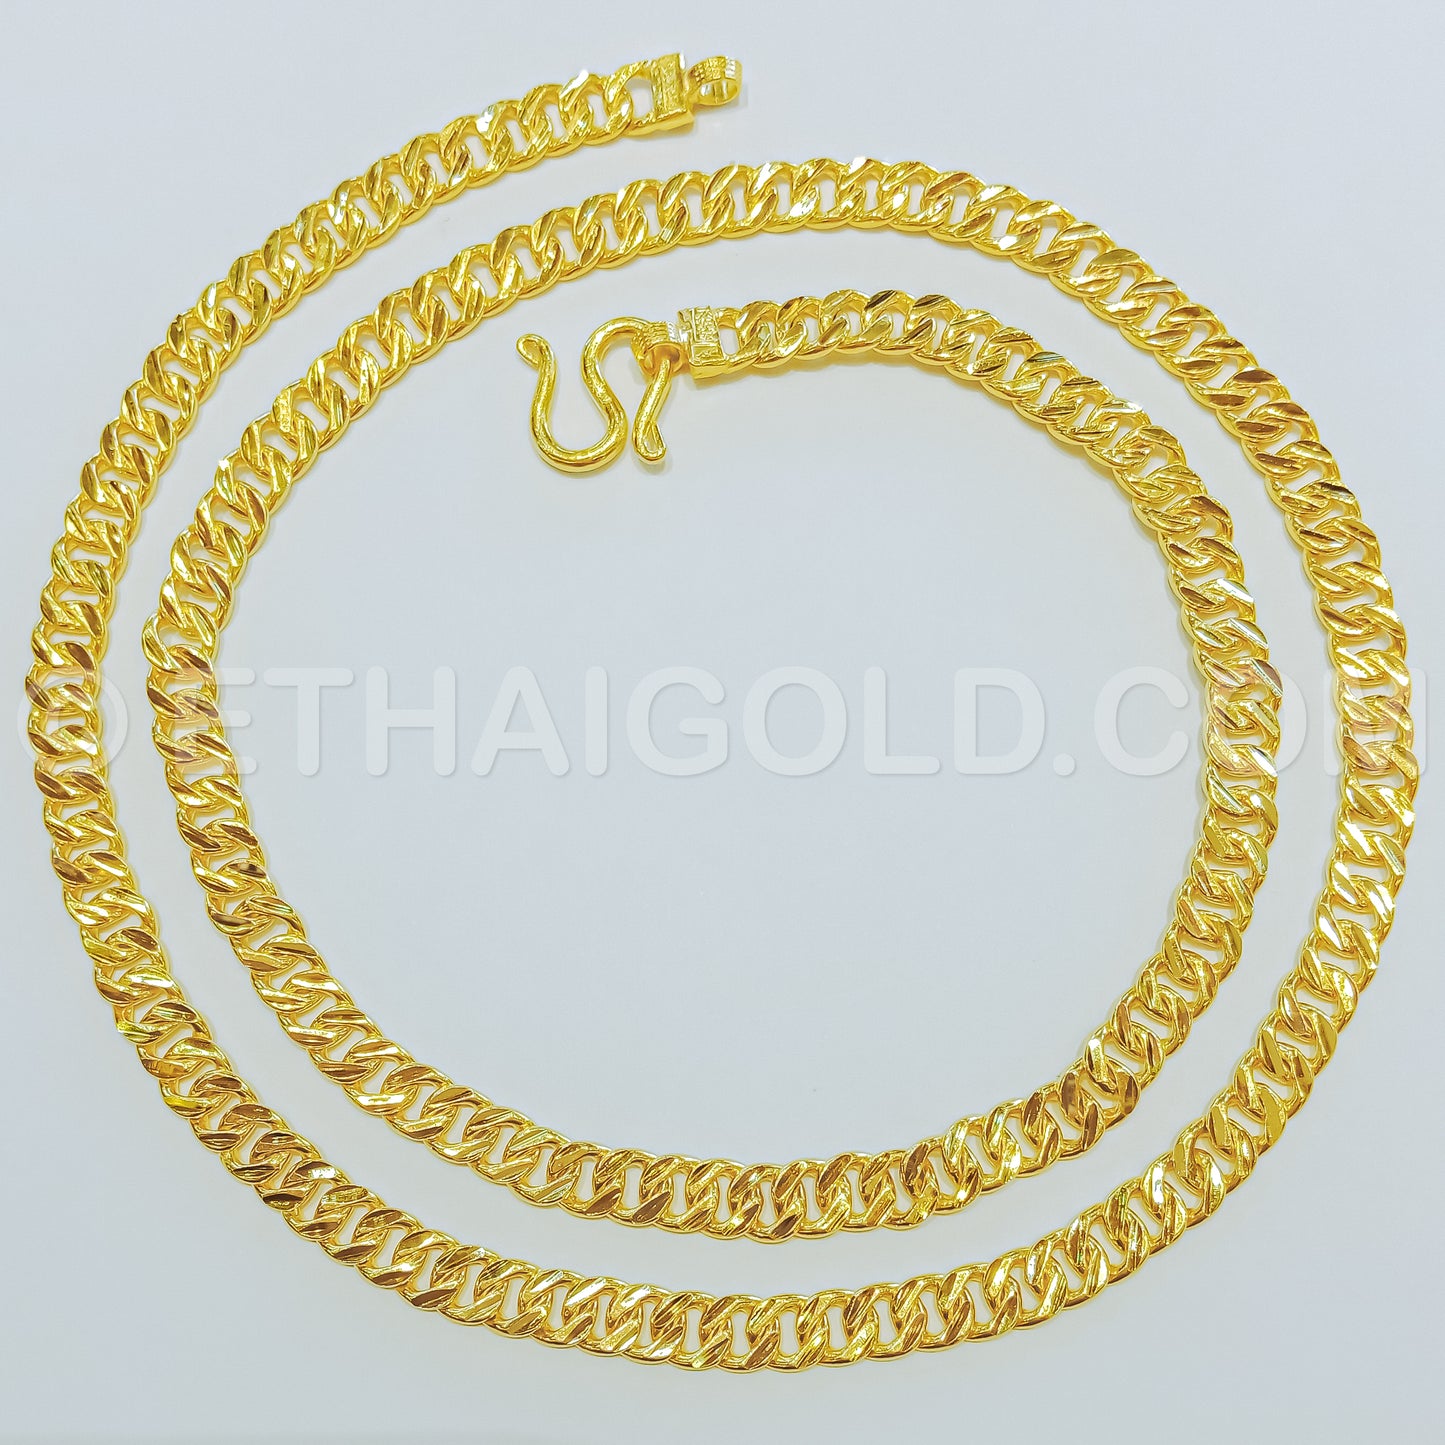 4 BAHT POLISHED DIAMOND-CUT SOLID CURB CHAIN NECKLACE IN 23K GOLD (ID: N0704B)